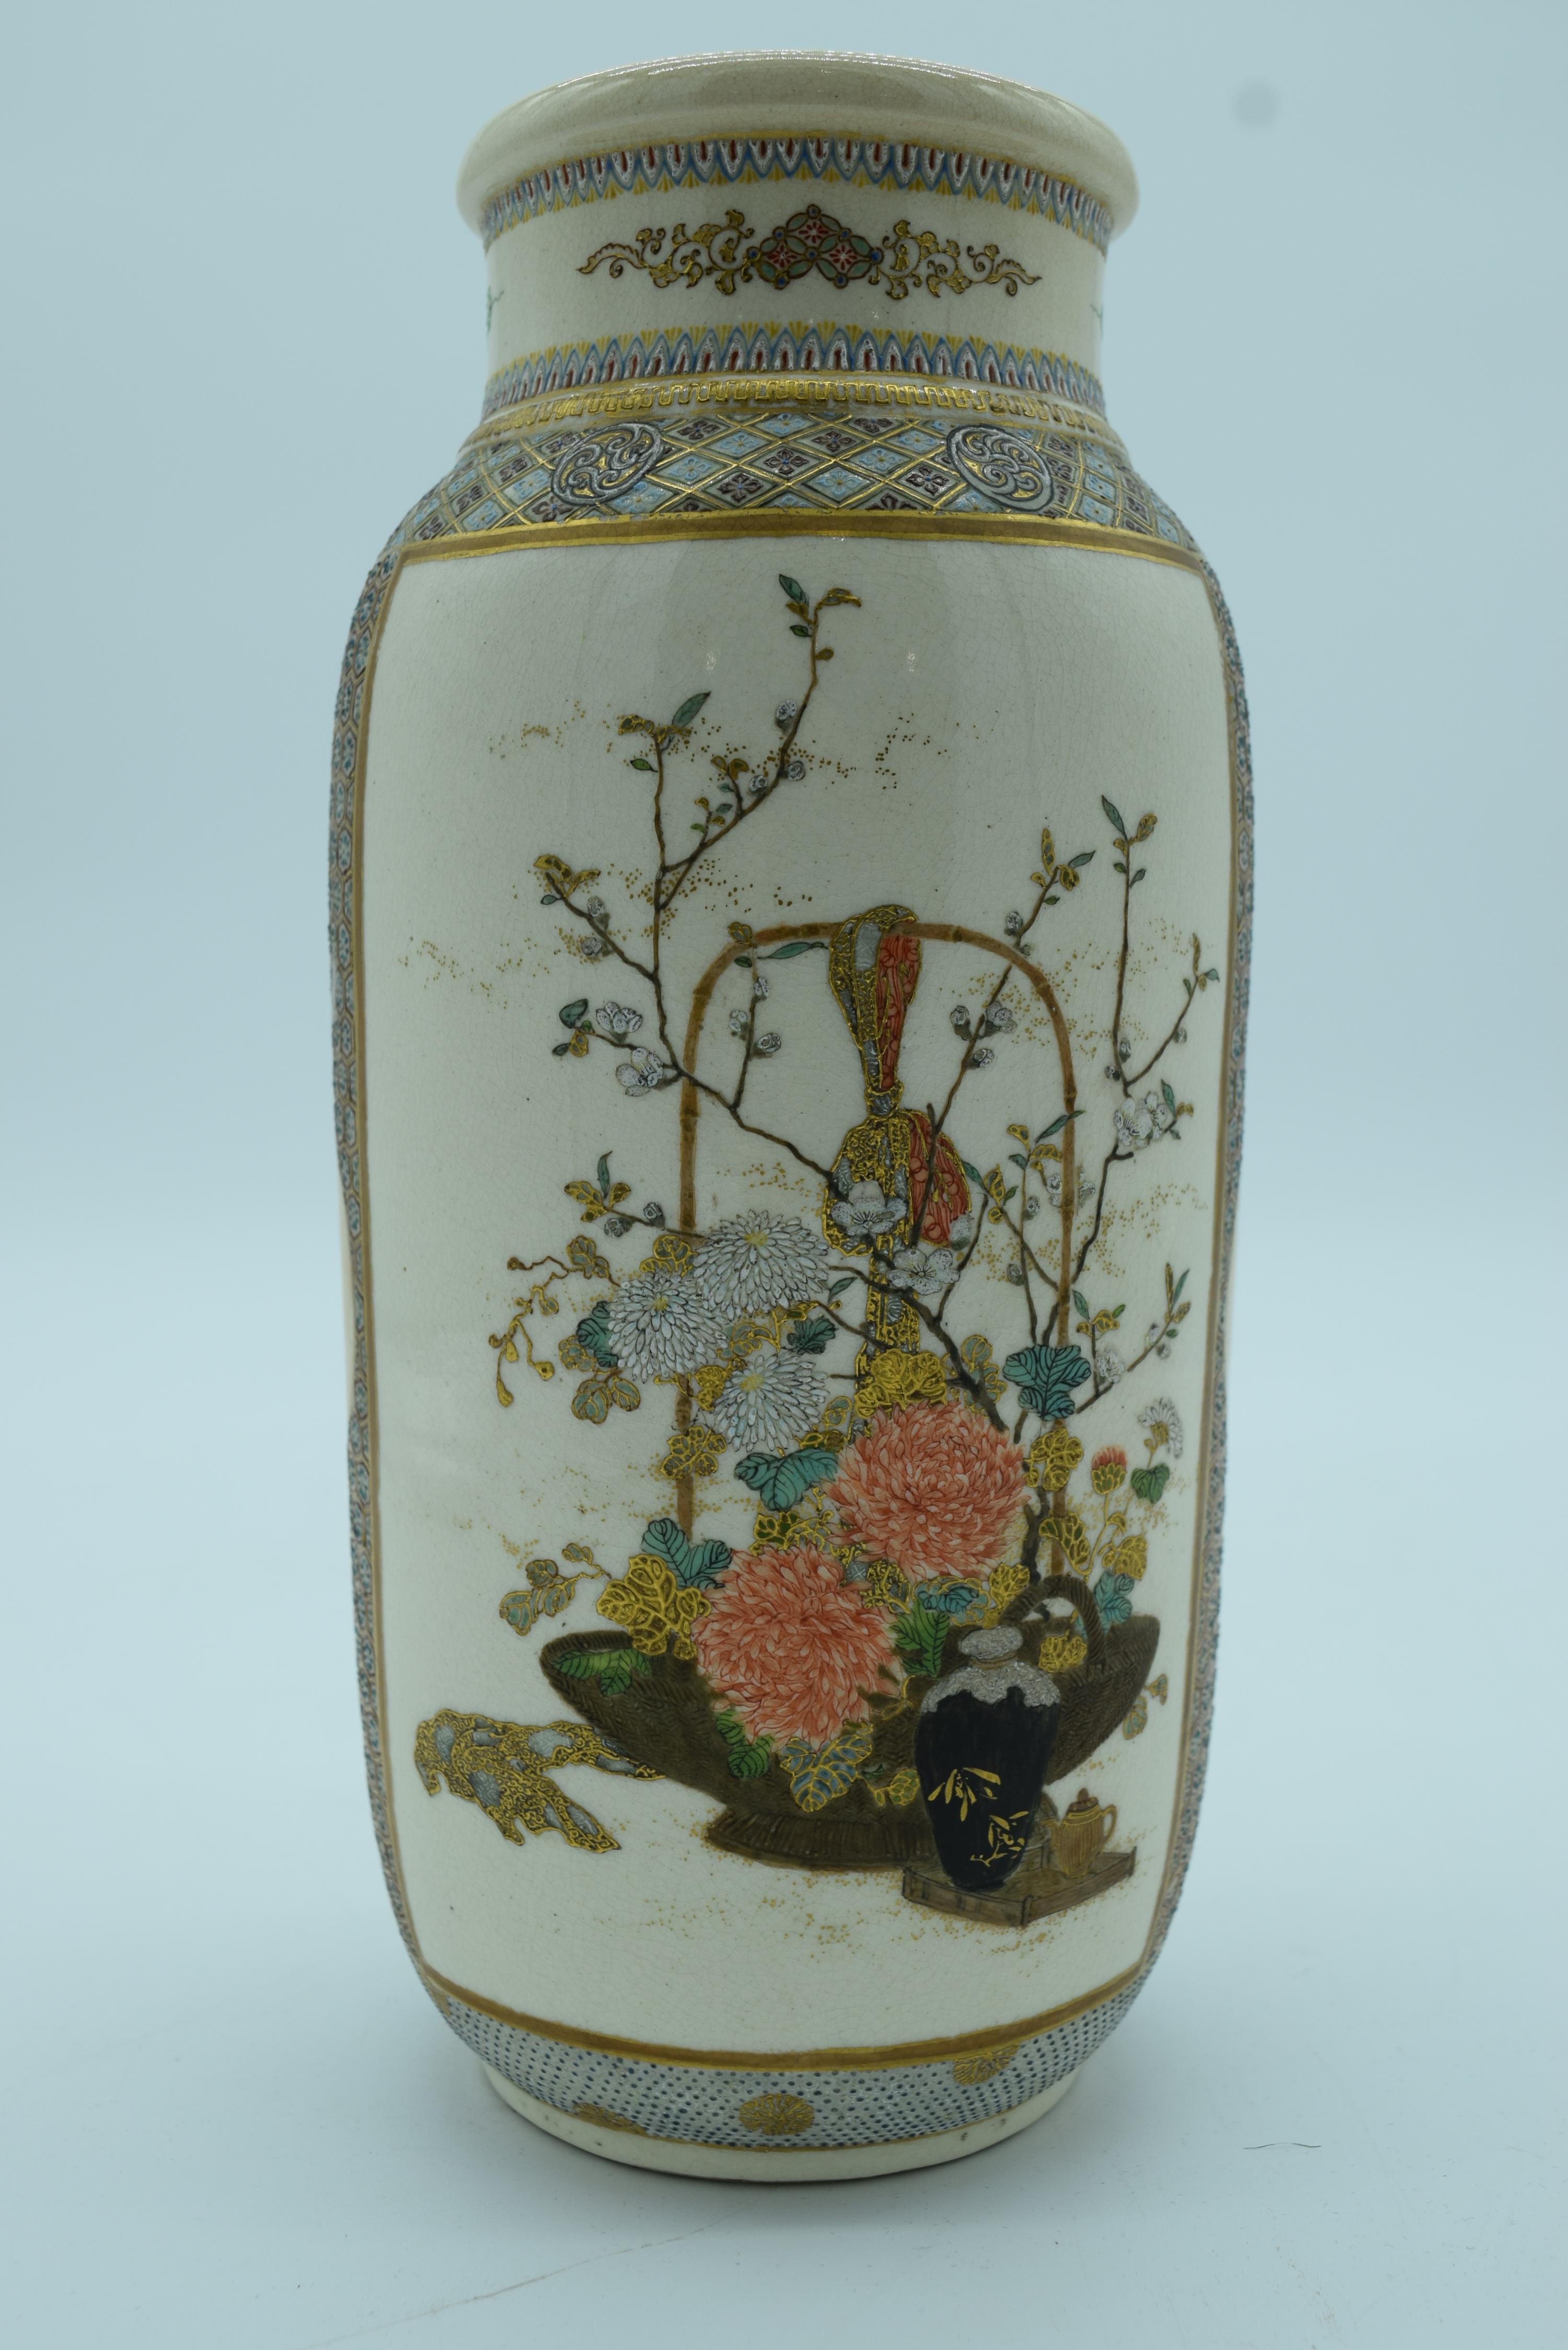 A PAIR OF 19TH CENTURY JAPANESE MEIJI PERIOD SATSUMA VASES painted with bonzai trees and high tables - Image 14 of 19